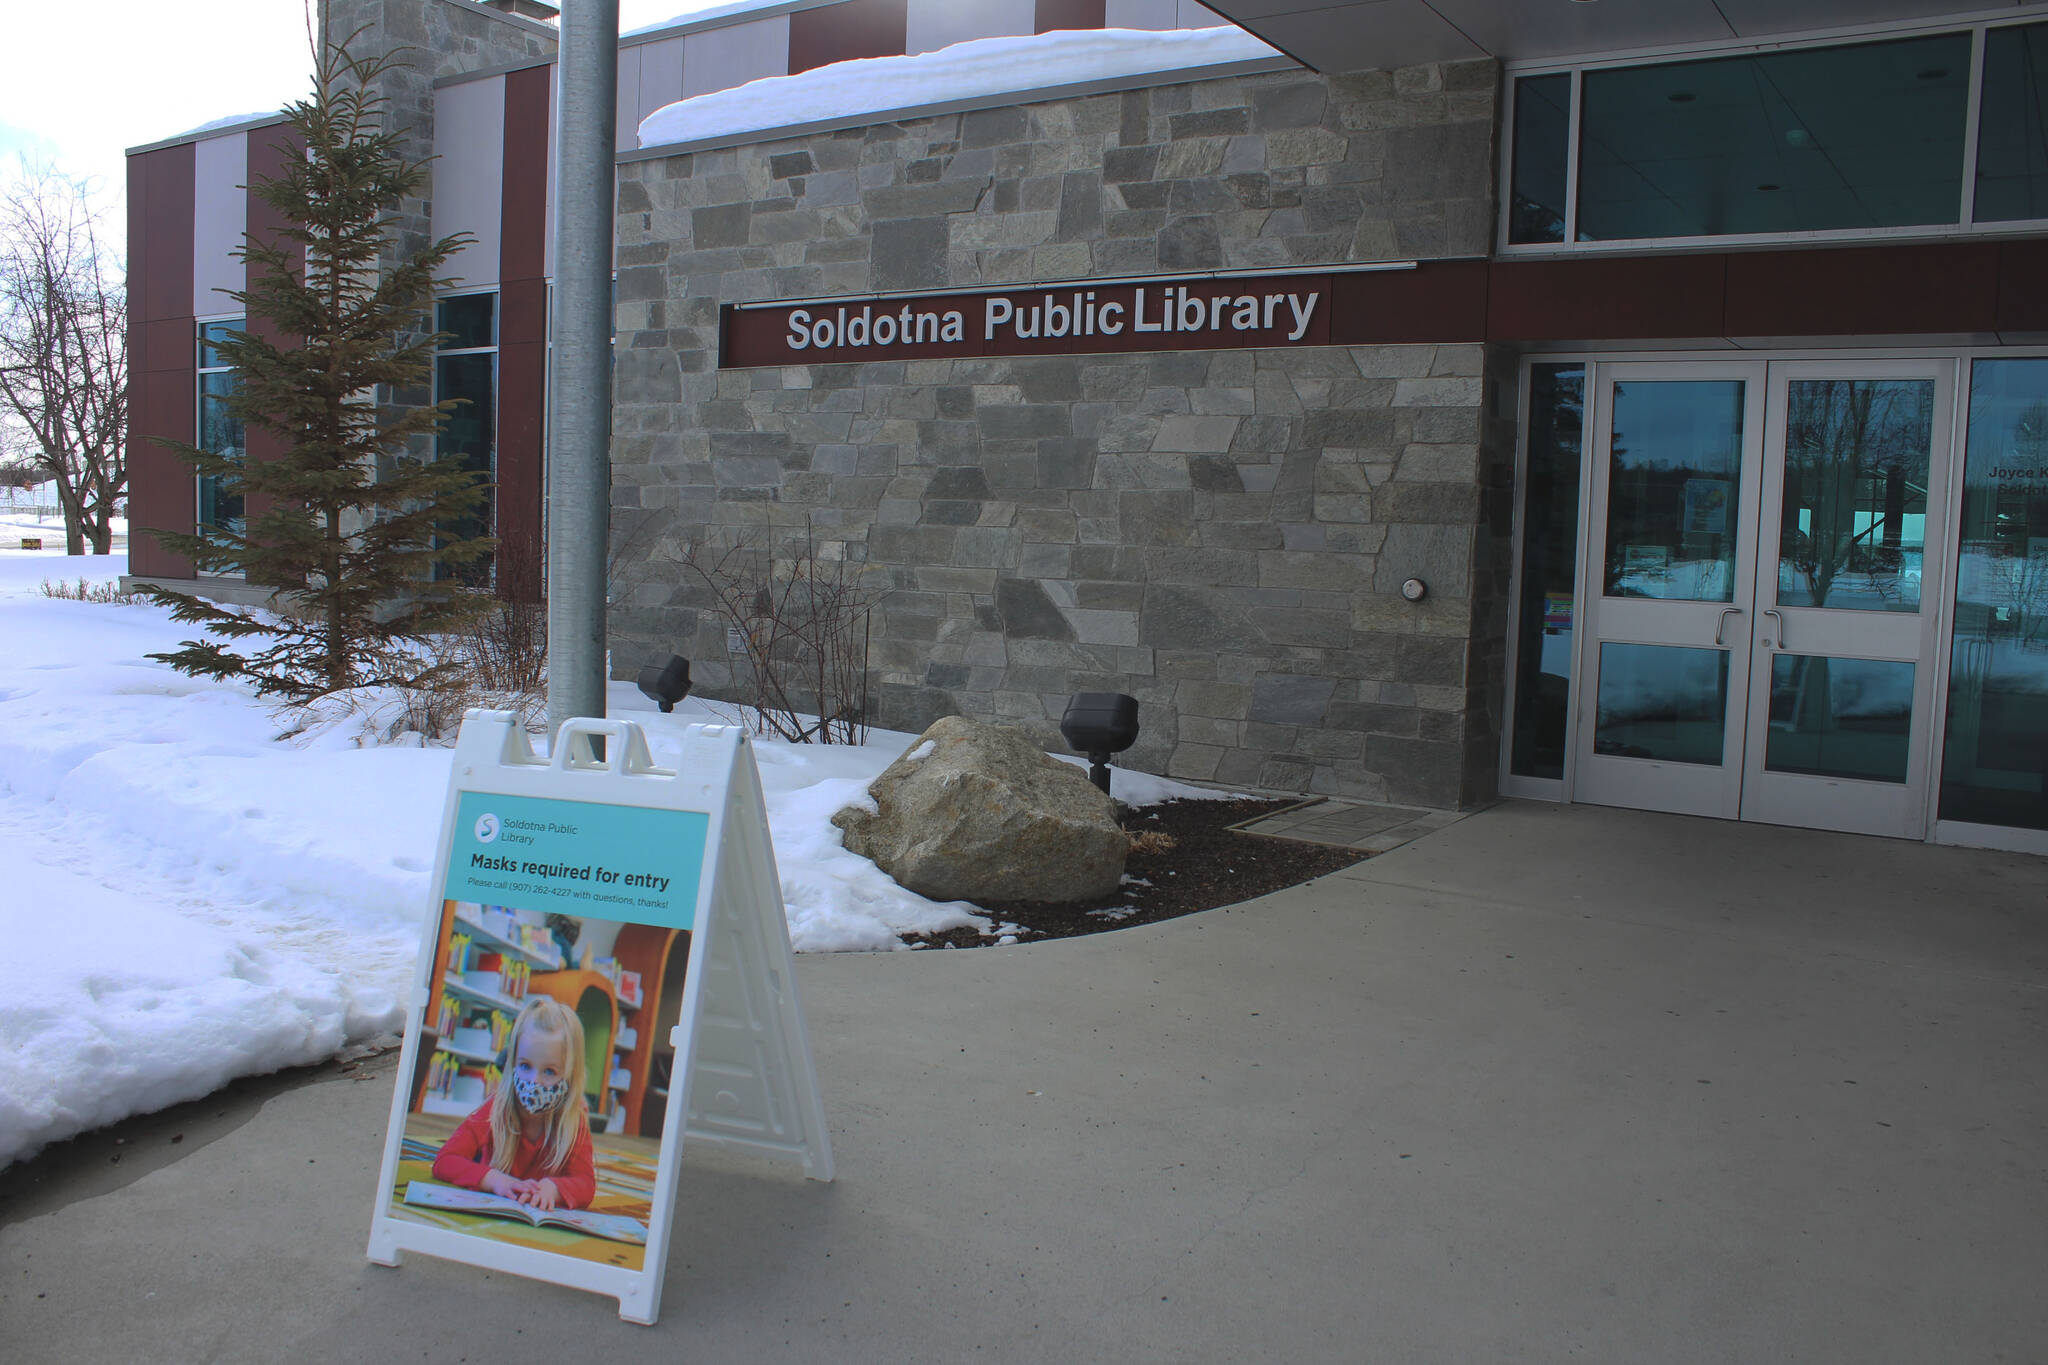 Signage indicates that face masks are required for entry to the Soldotna Public Library on March 25, 2021 in Soldotna, Alaska. The Soldotna City Council voted Wednesday to make mask-wearing optional in city facilities. (Ashlyn O’Hara/Peninsula Clarion)